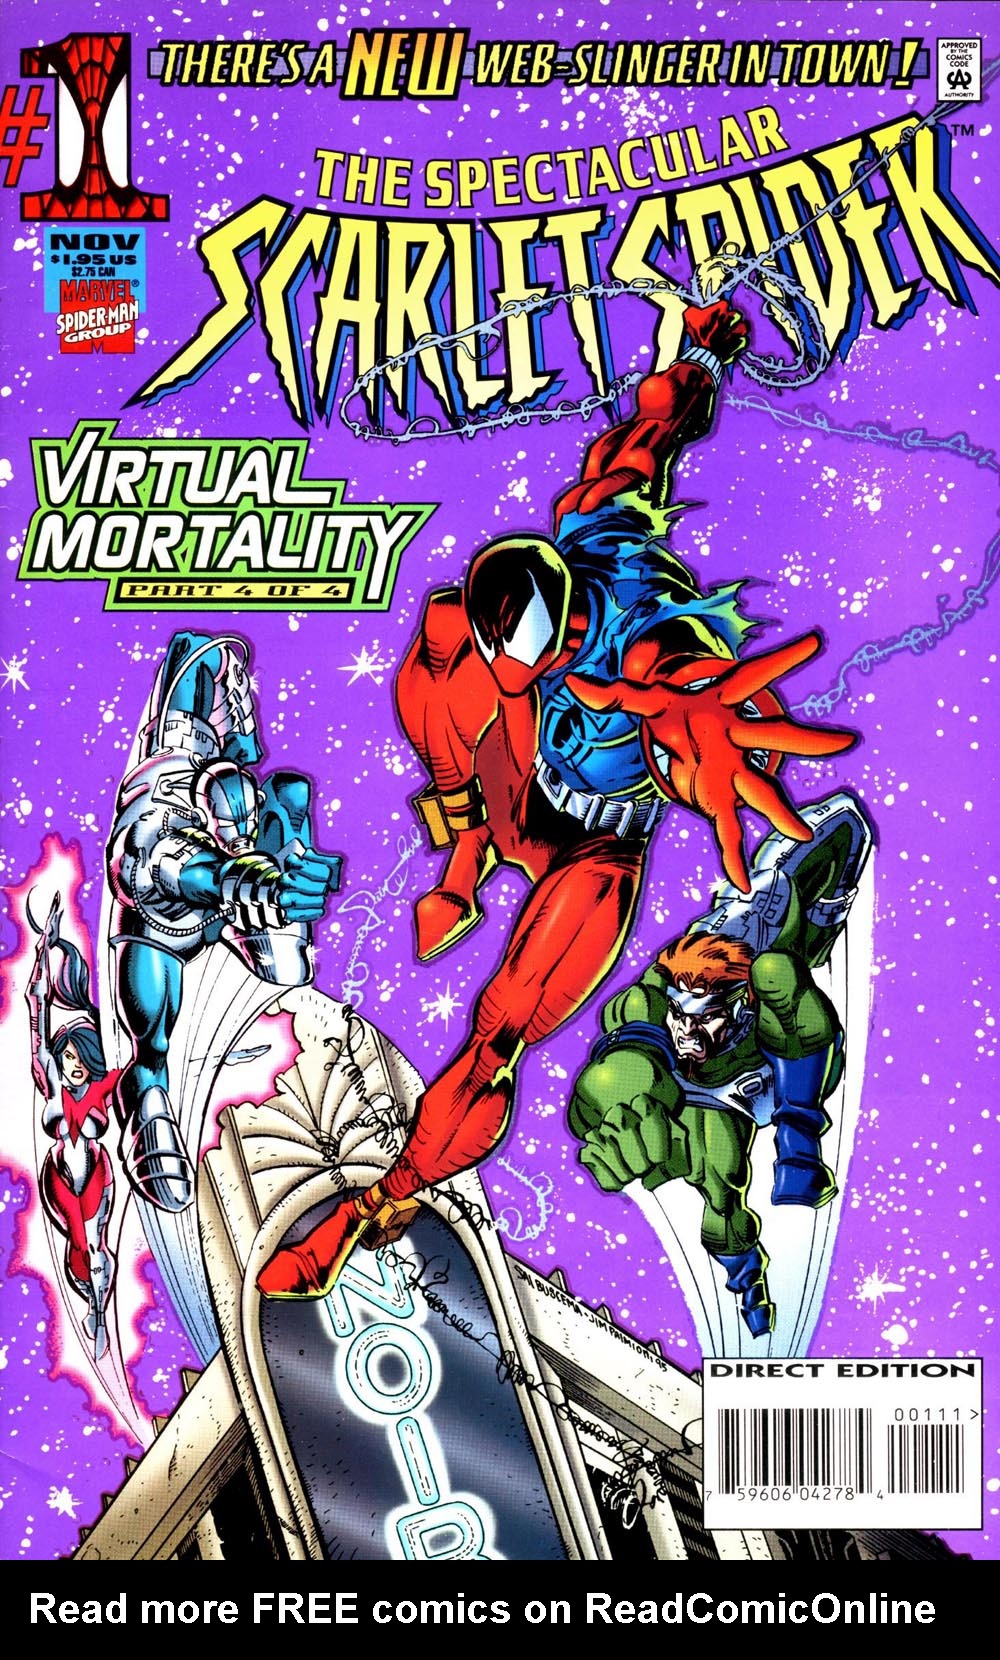 Read online Spectacular Scarlet Spider comic -  Issue #1 - 1